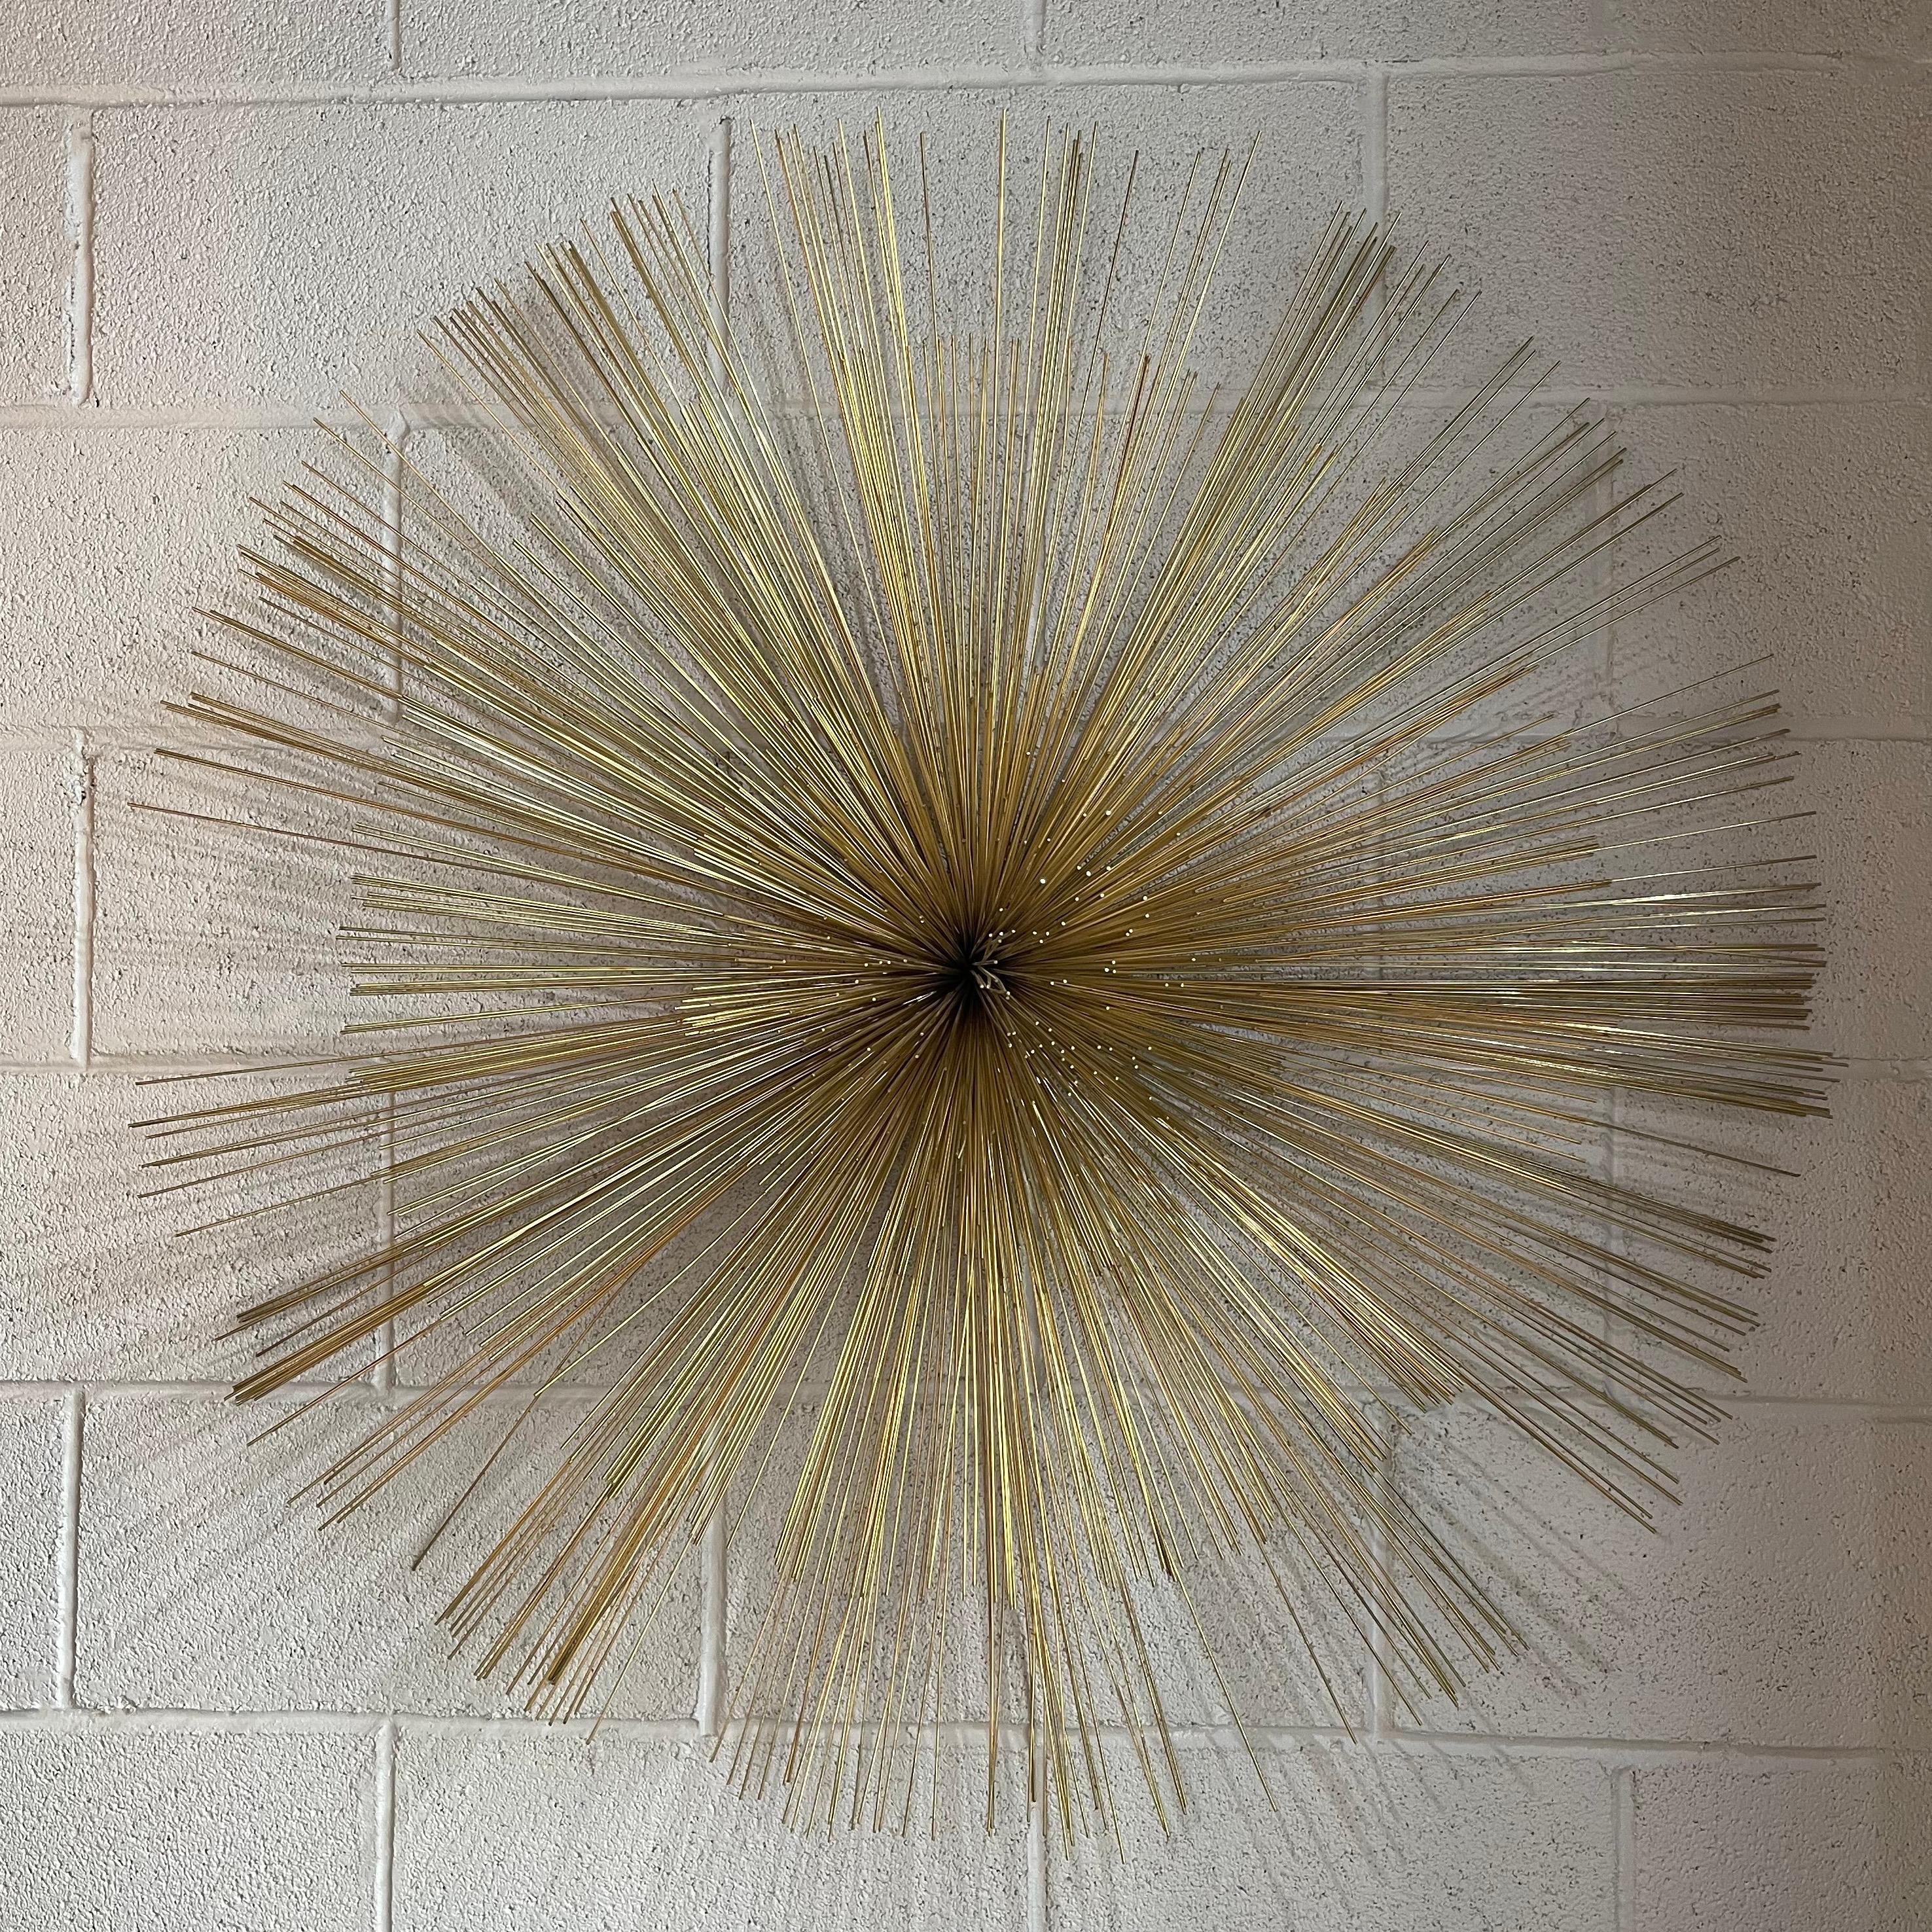 Large, impressive, pom pom wall sculpture by Curtis Jere consists of fine, brass rods eminating from a center plate signed and dated 1989.